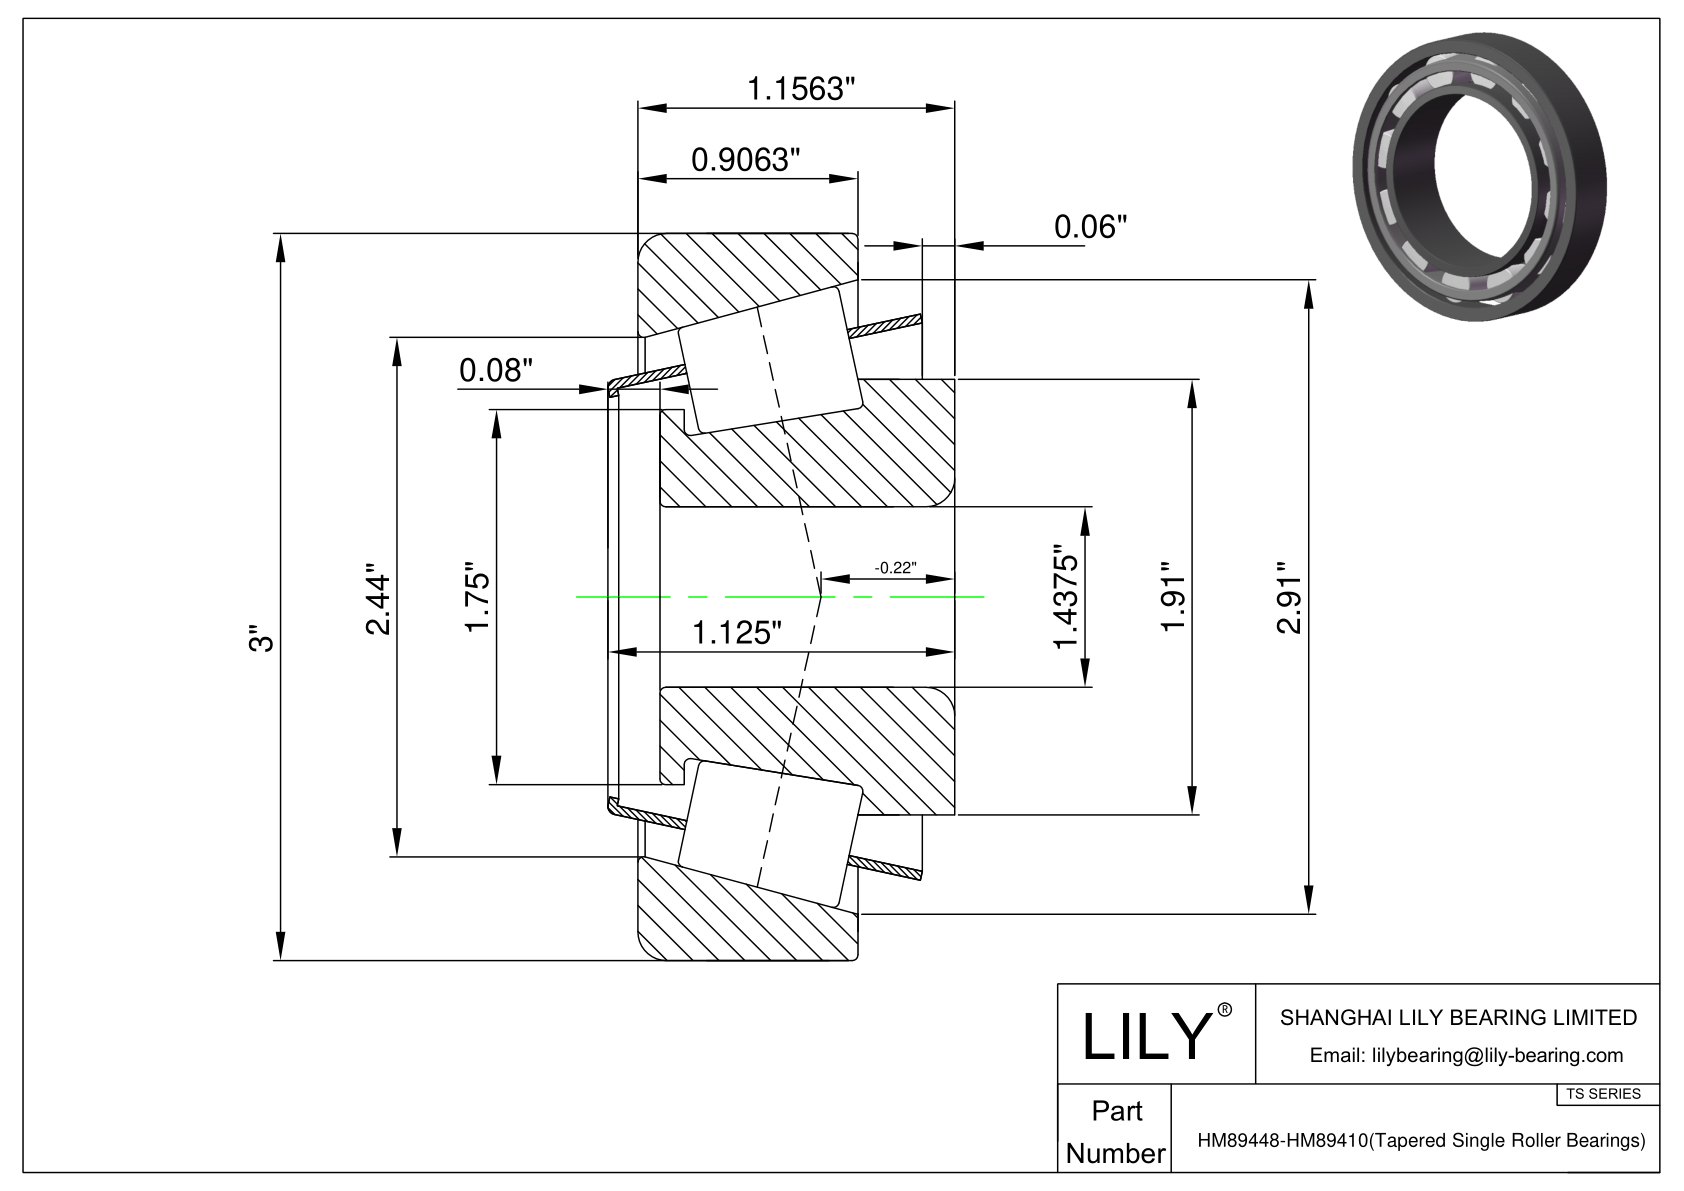 HM89448-HM89410 TS (Tapered Single Roller Bearings) (Imperial) cad drawing